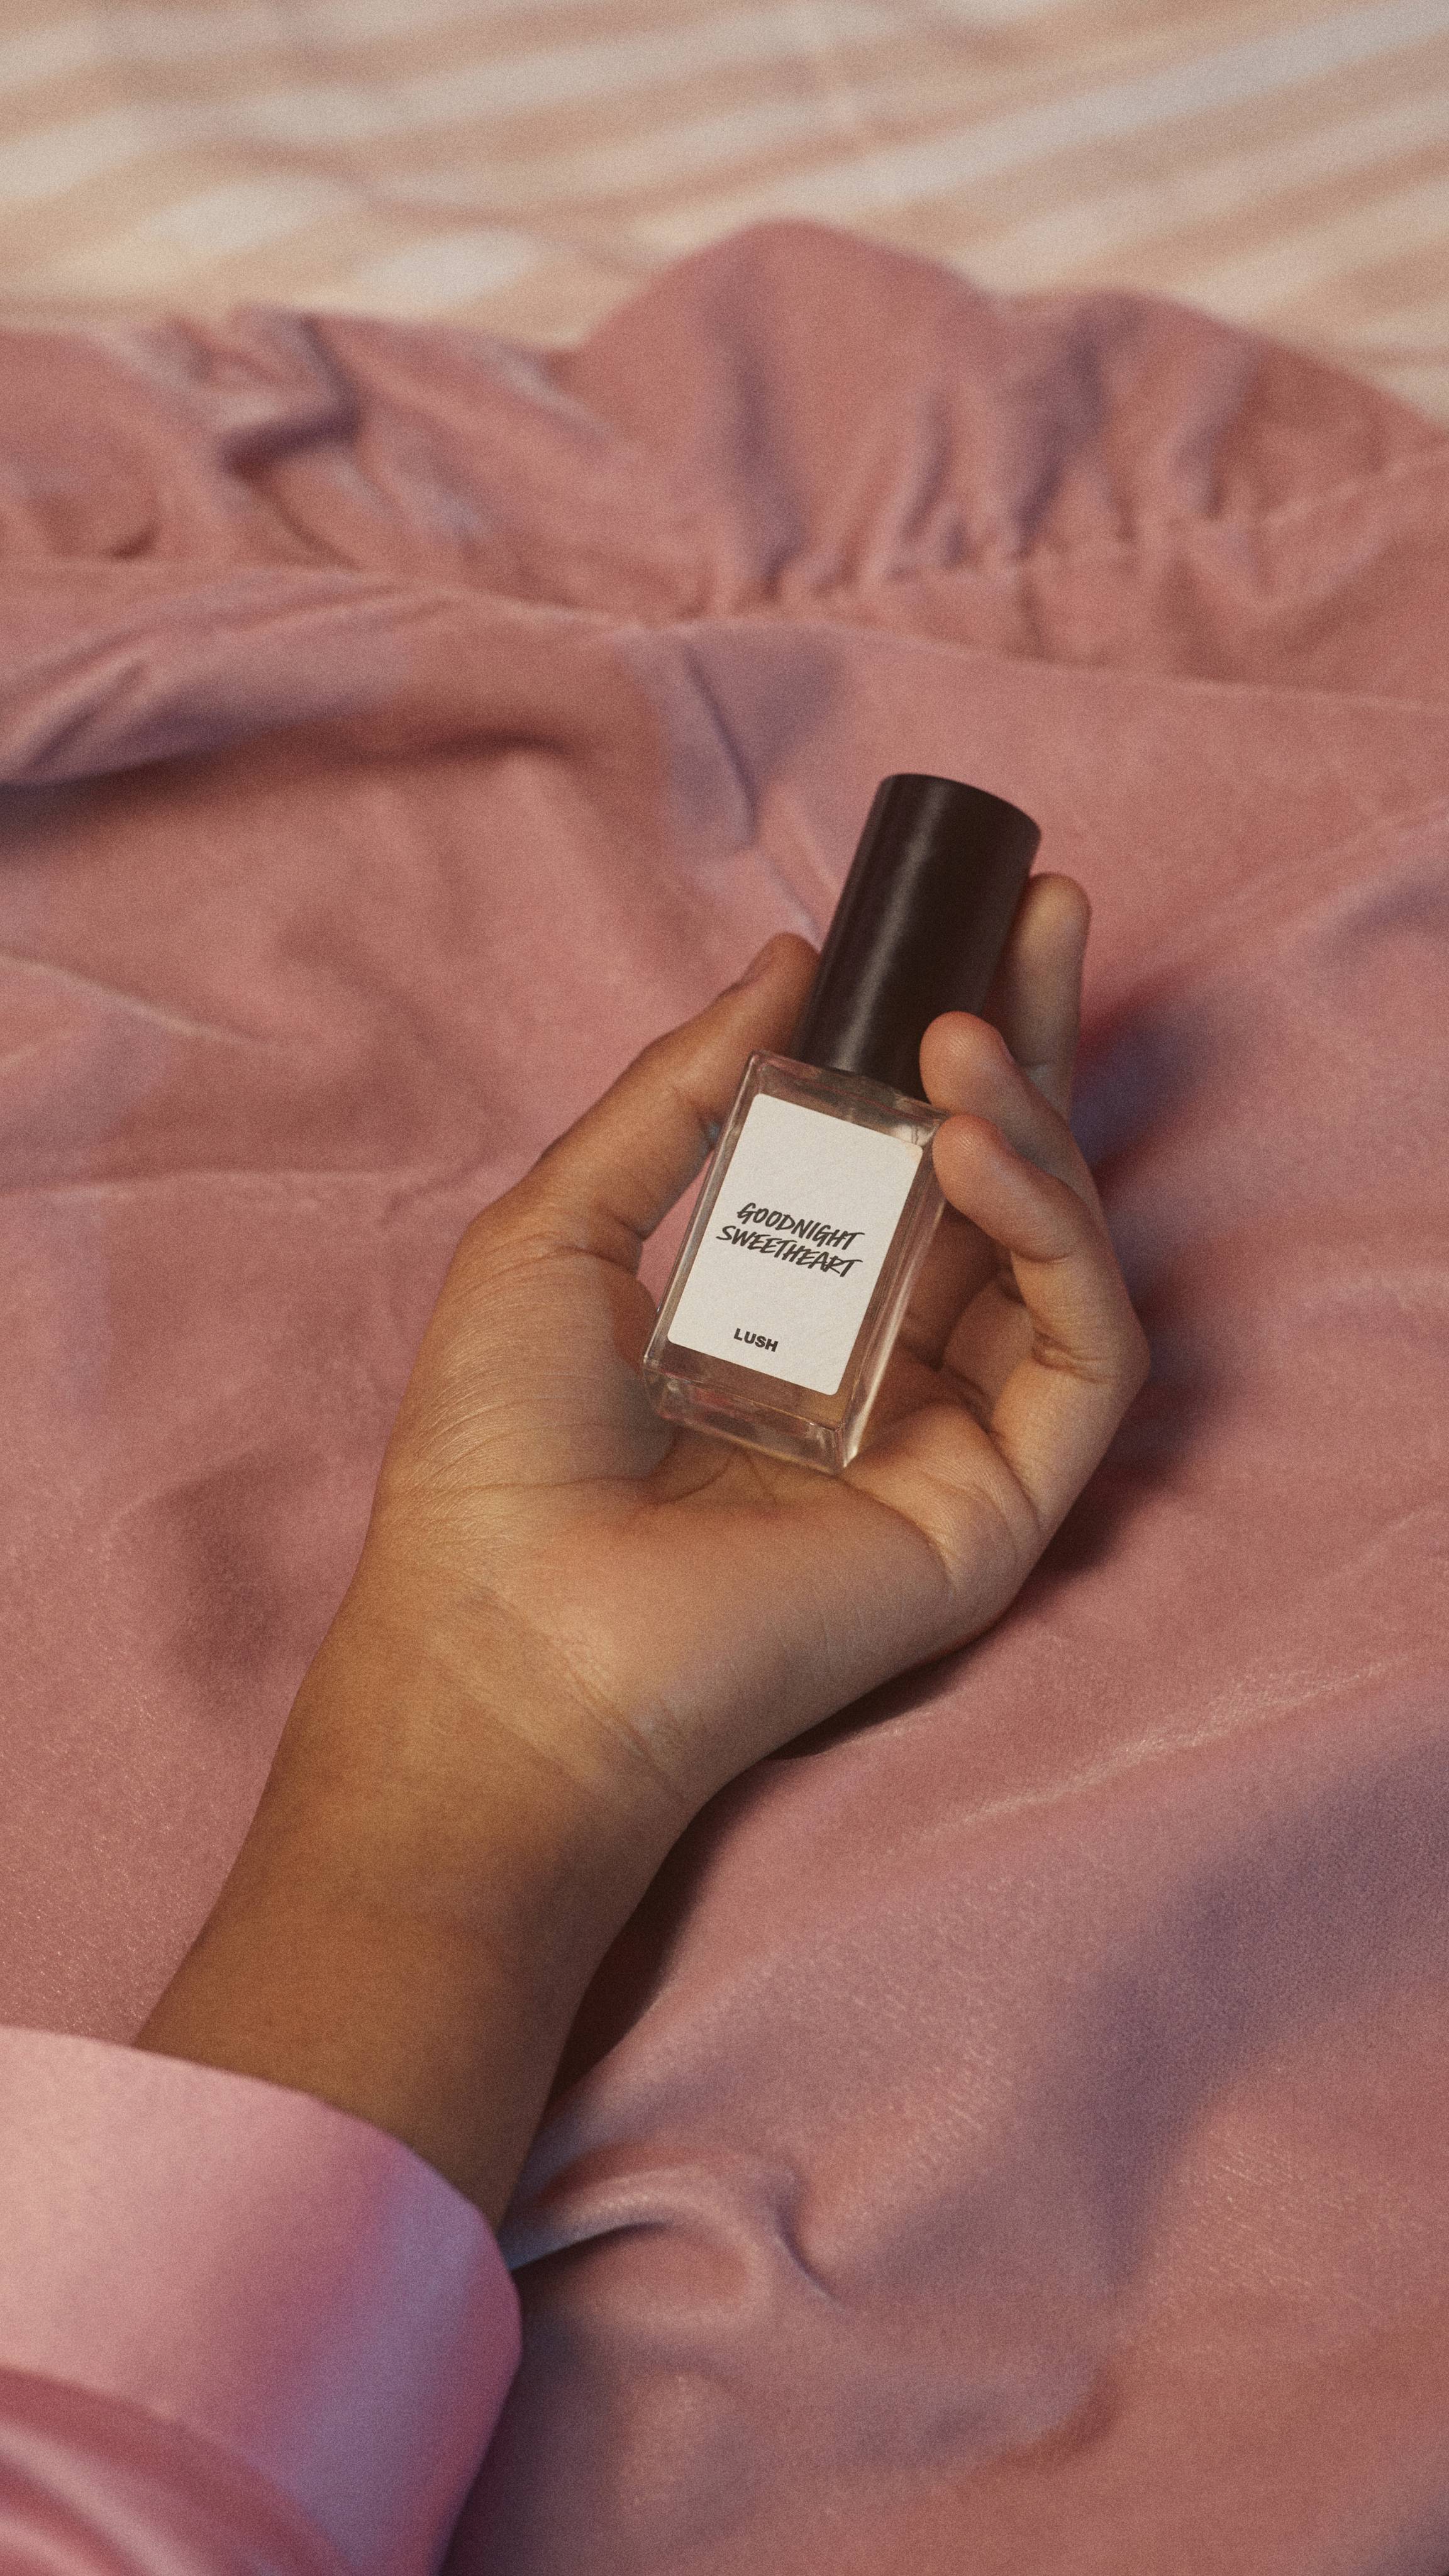 A close-up image of the model's hand gently holding the Goodnight Sweetheart glass bottle on a dusky pink blanket.